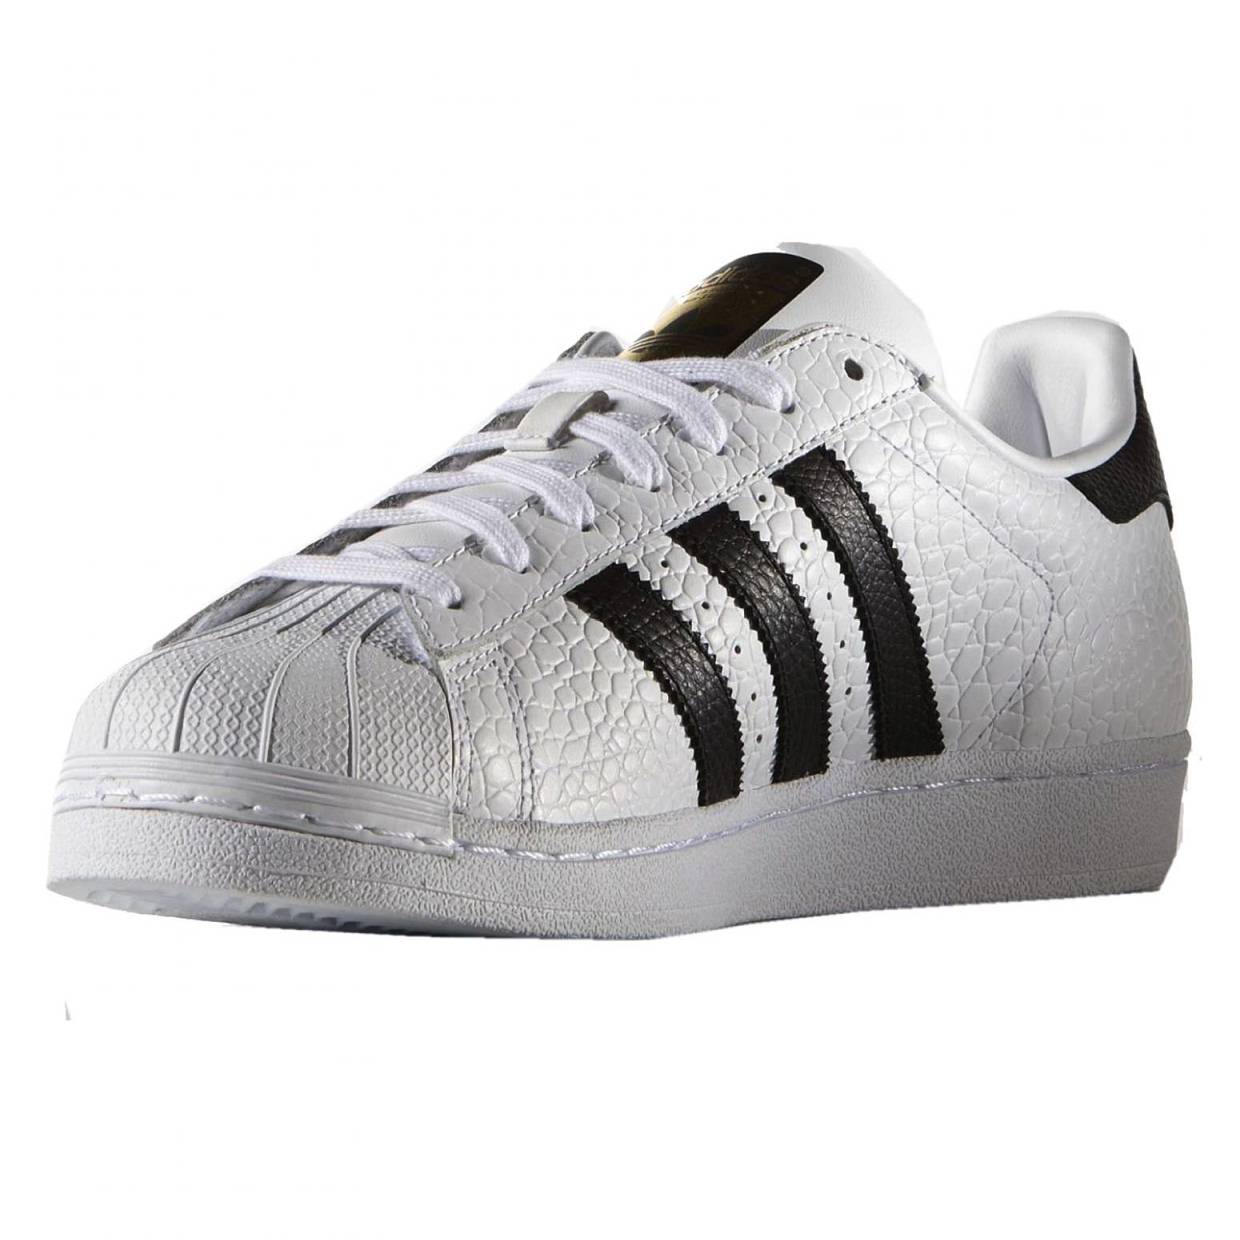 Adidas Superstar Animal – Shoes Reviews & Reasons To Buy